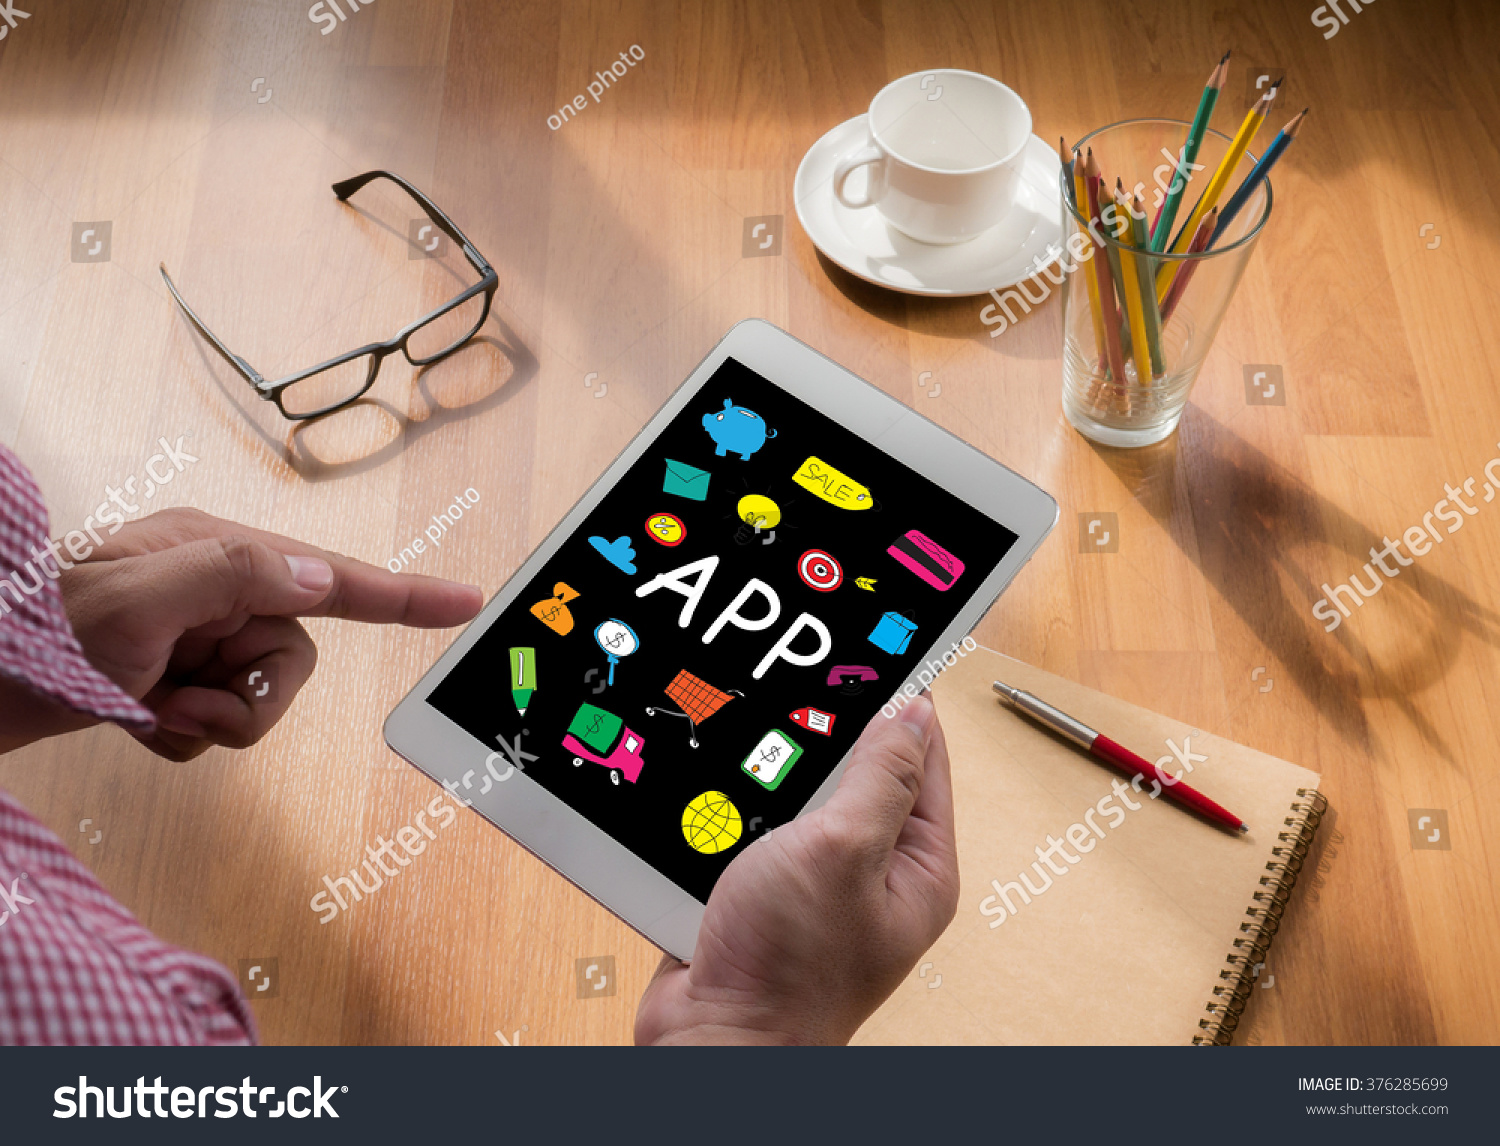 Apps concept, touch digital tablet, coffee #376285699